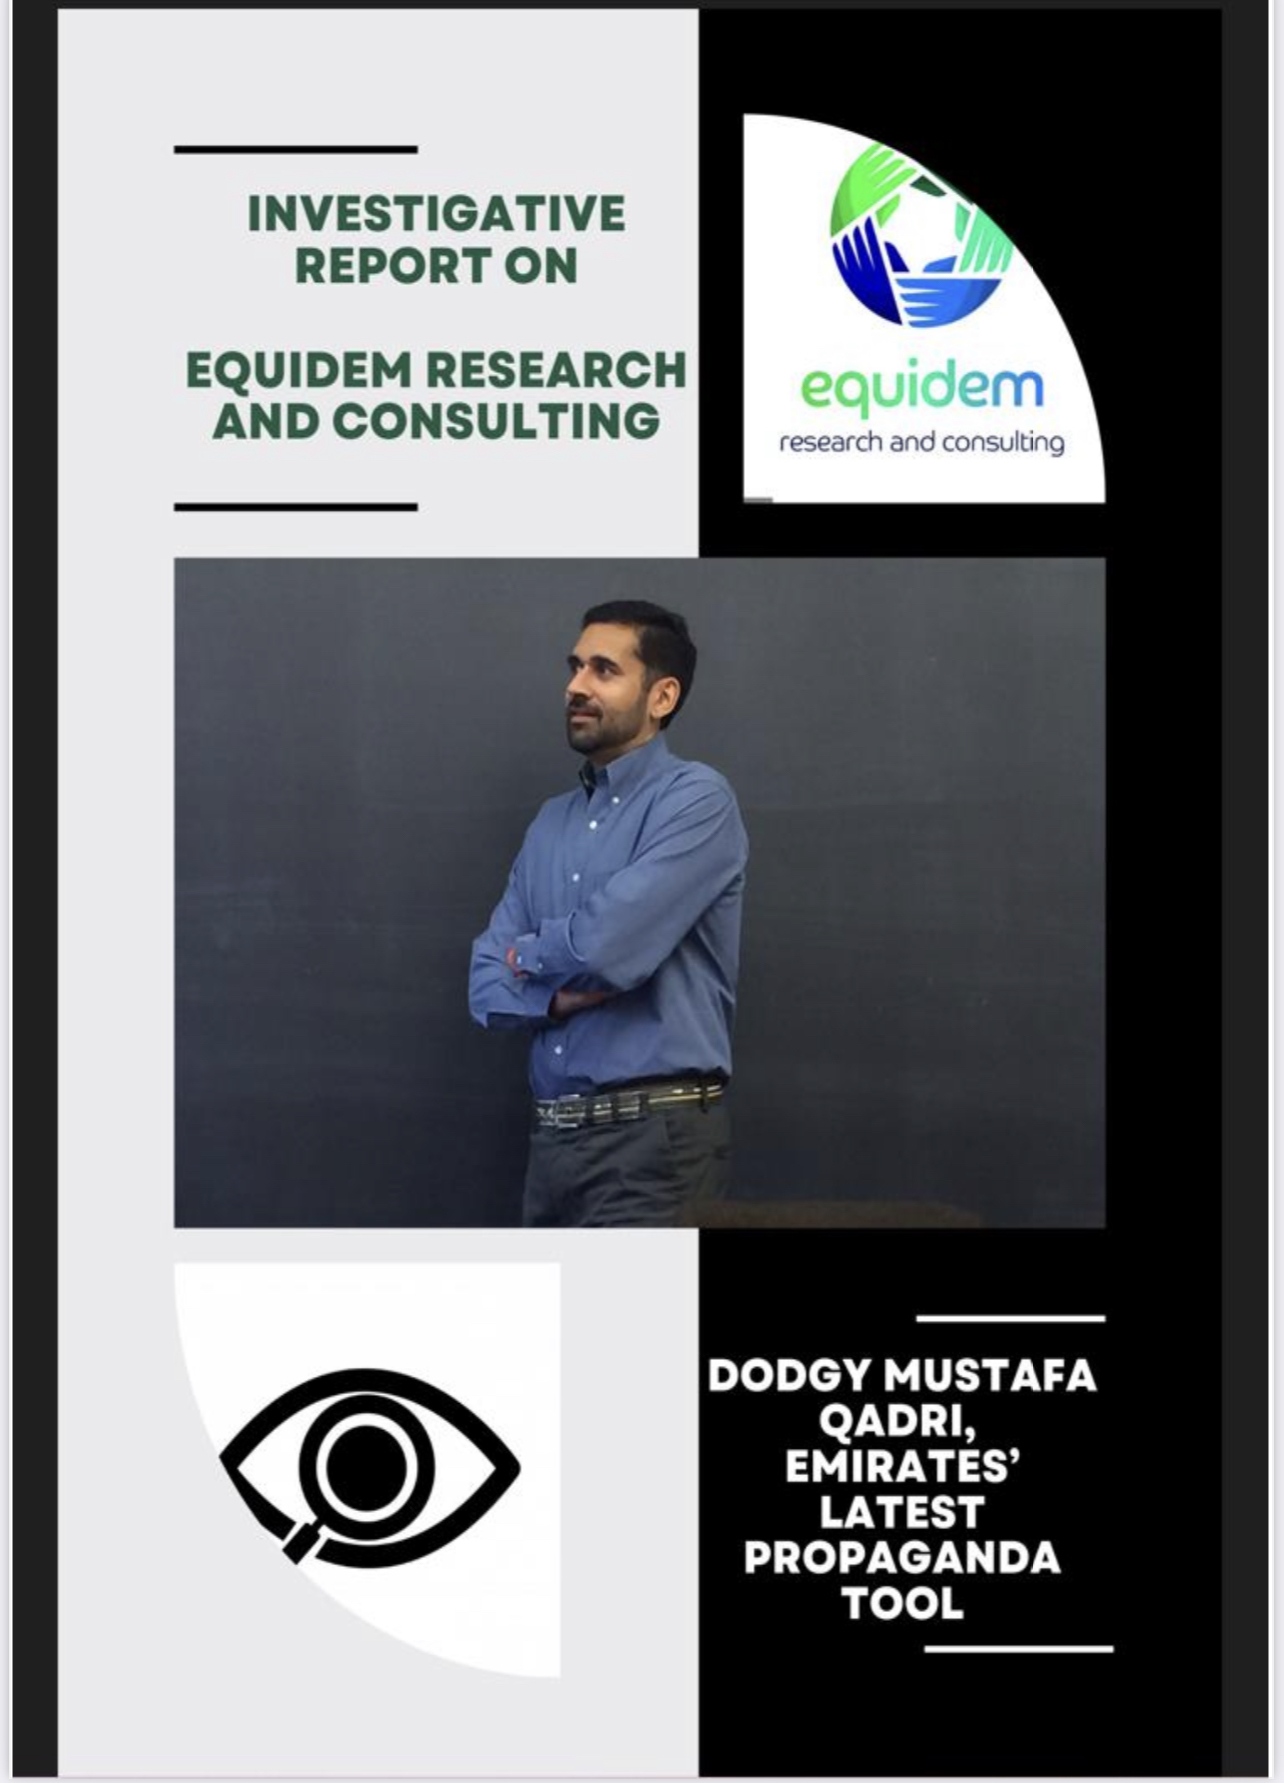 Investigative Report: Equidem Research and Consulting is funded by UAE